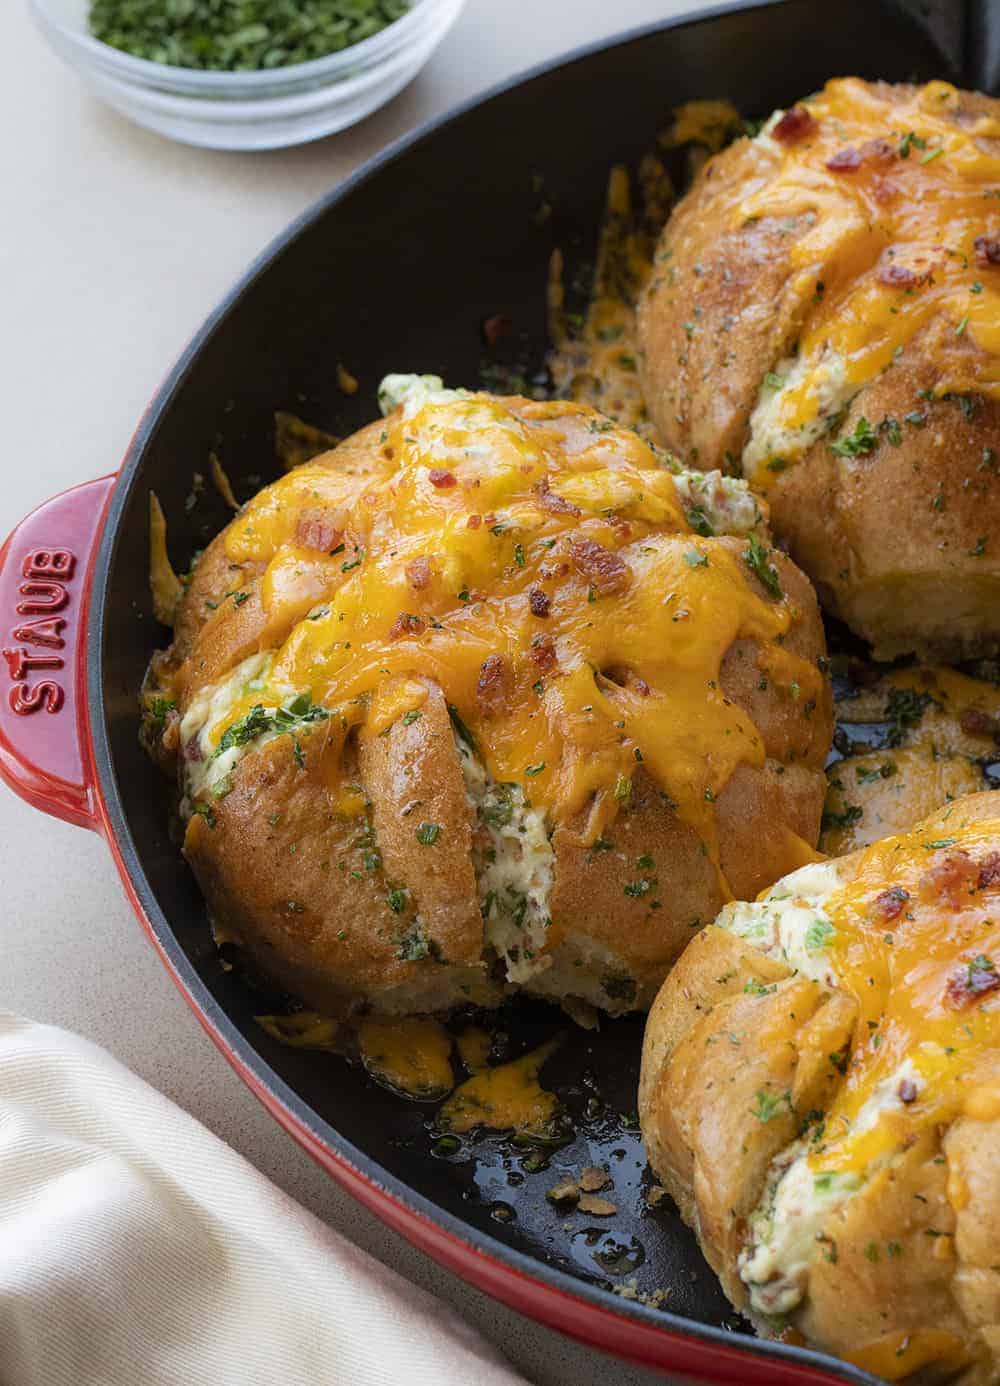 Jalapeno Popper Cheesy Pull Apart Bread in a Red Skillet Showing Gooey Cheese